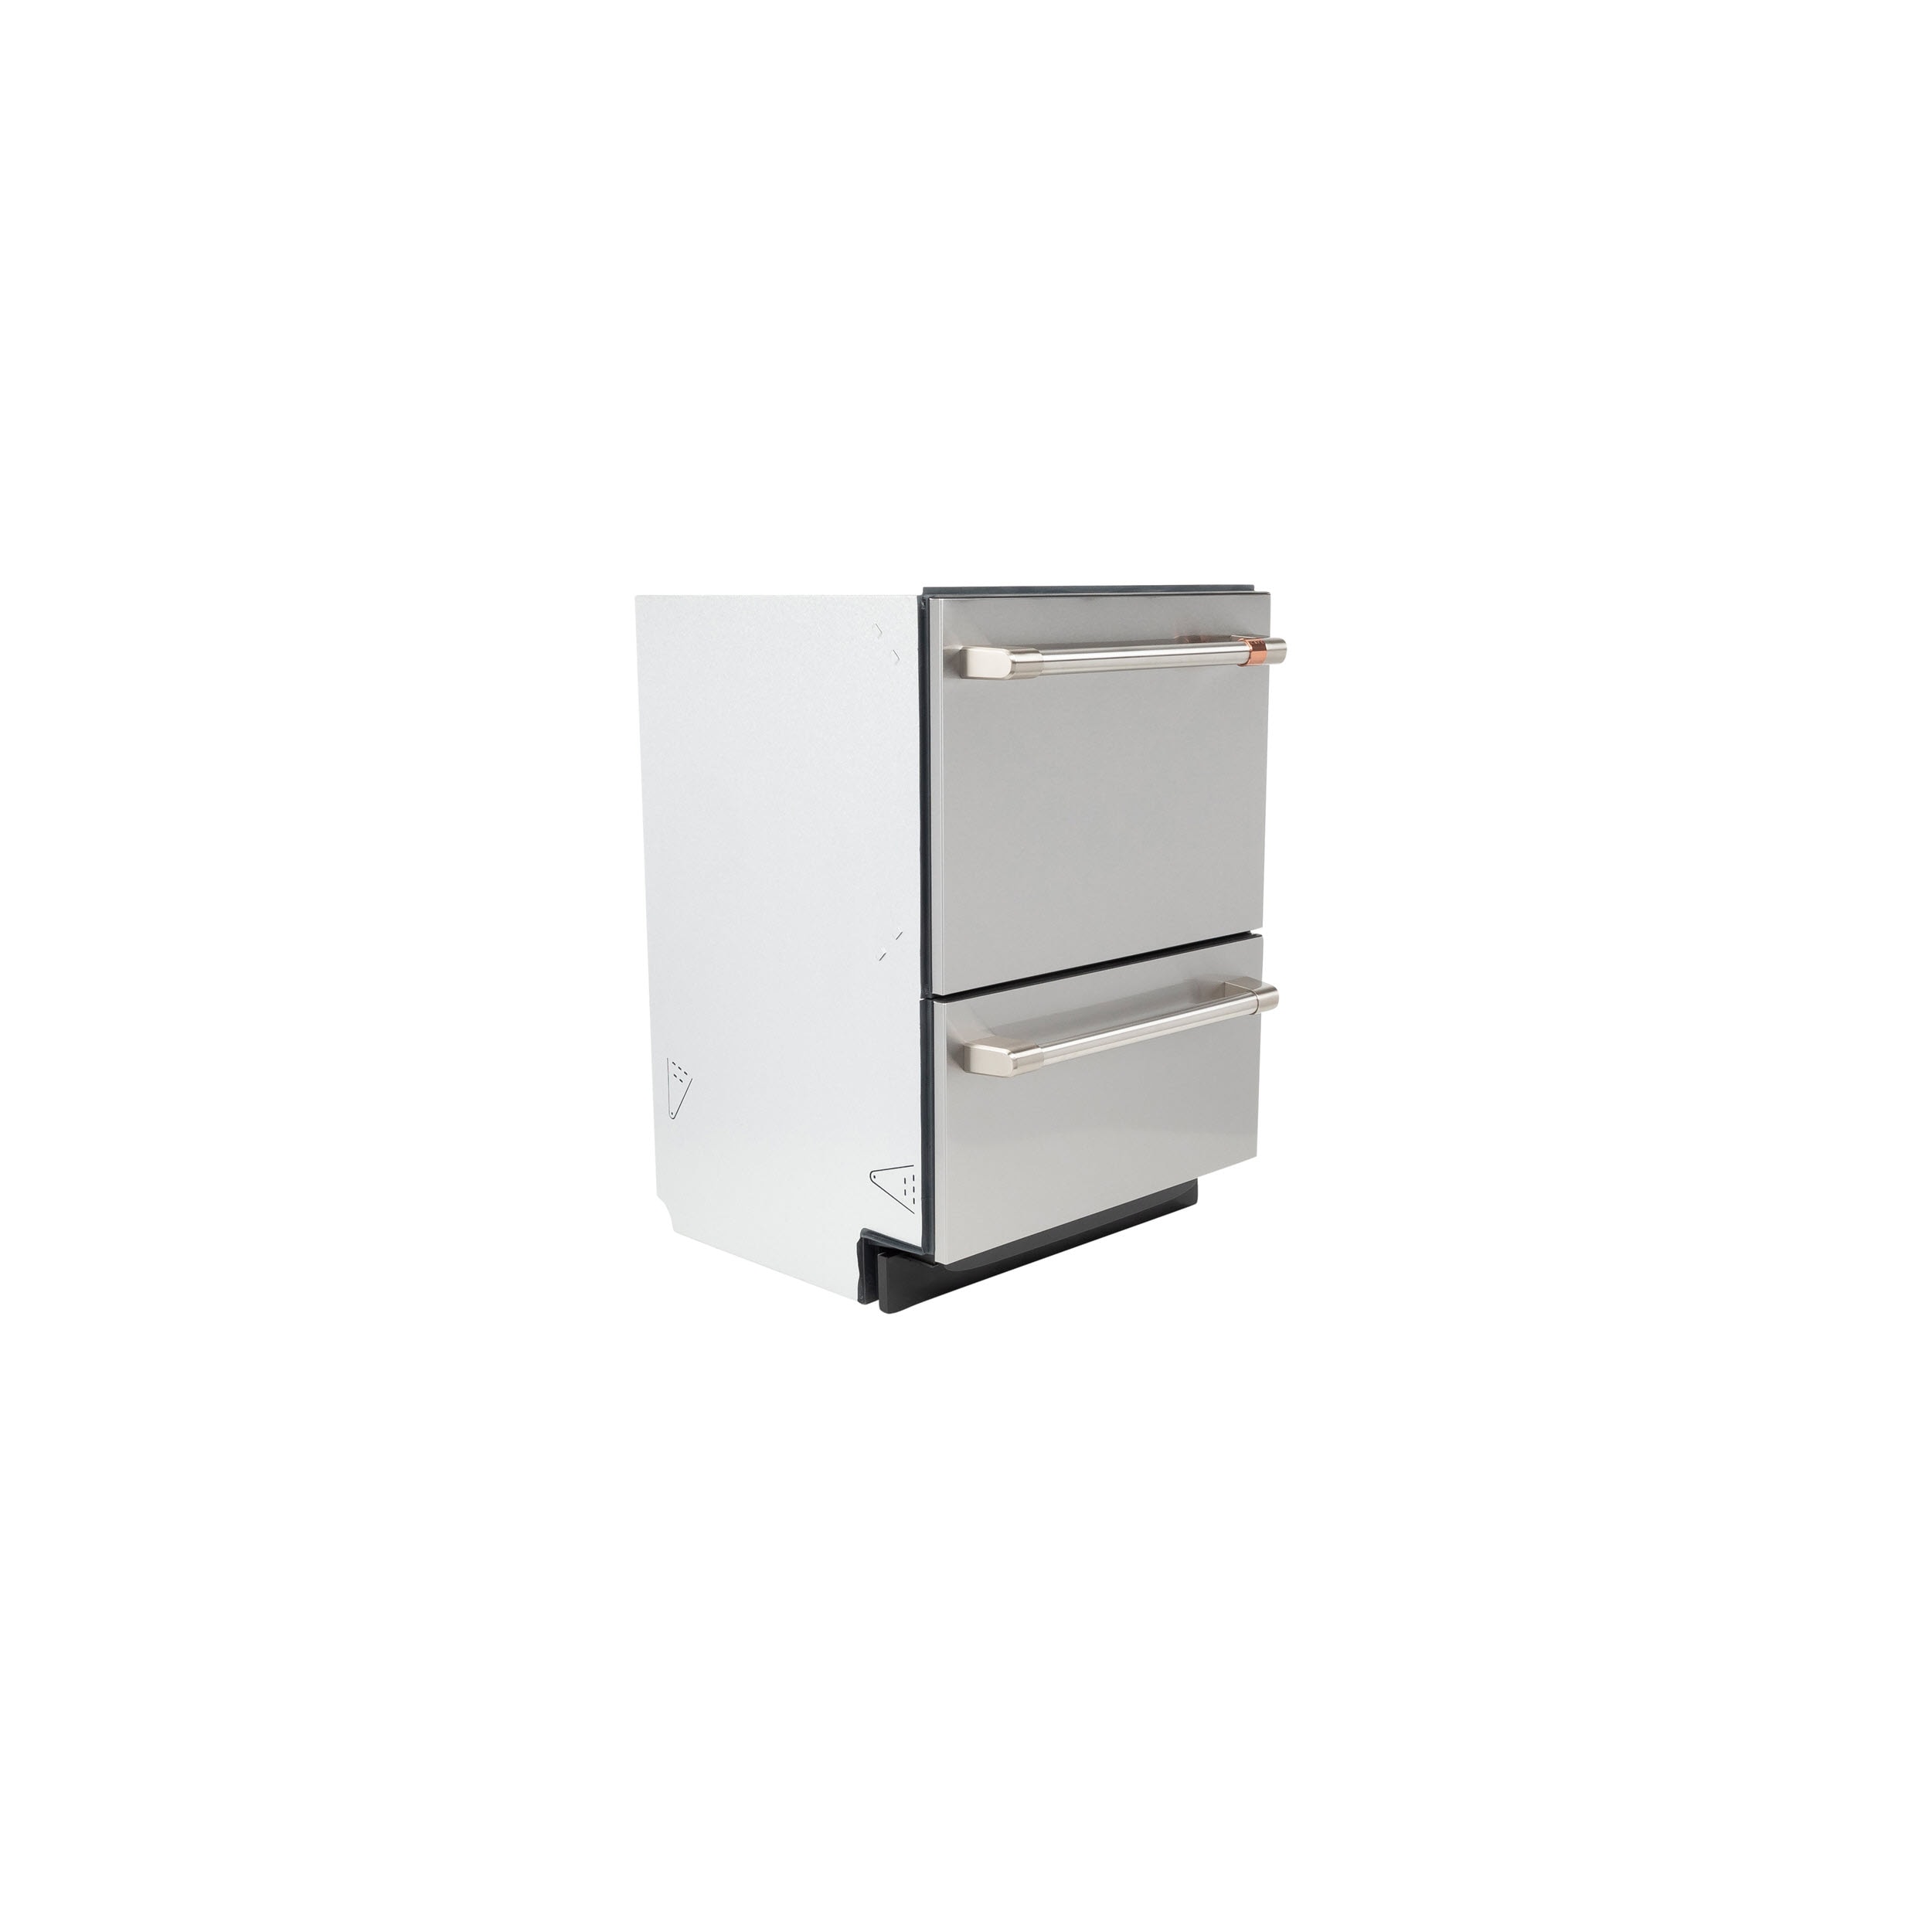 Café 24 Top Control Built-In Double Drawer Dishwasher, Customizable  Stainless Steel CDD420P2TS1 - Best Buy